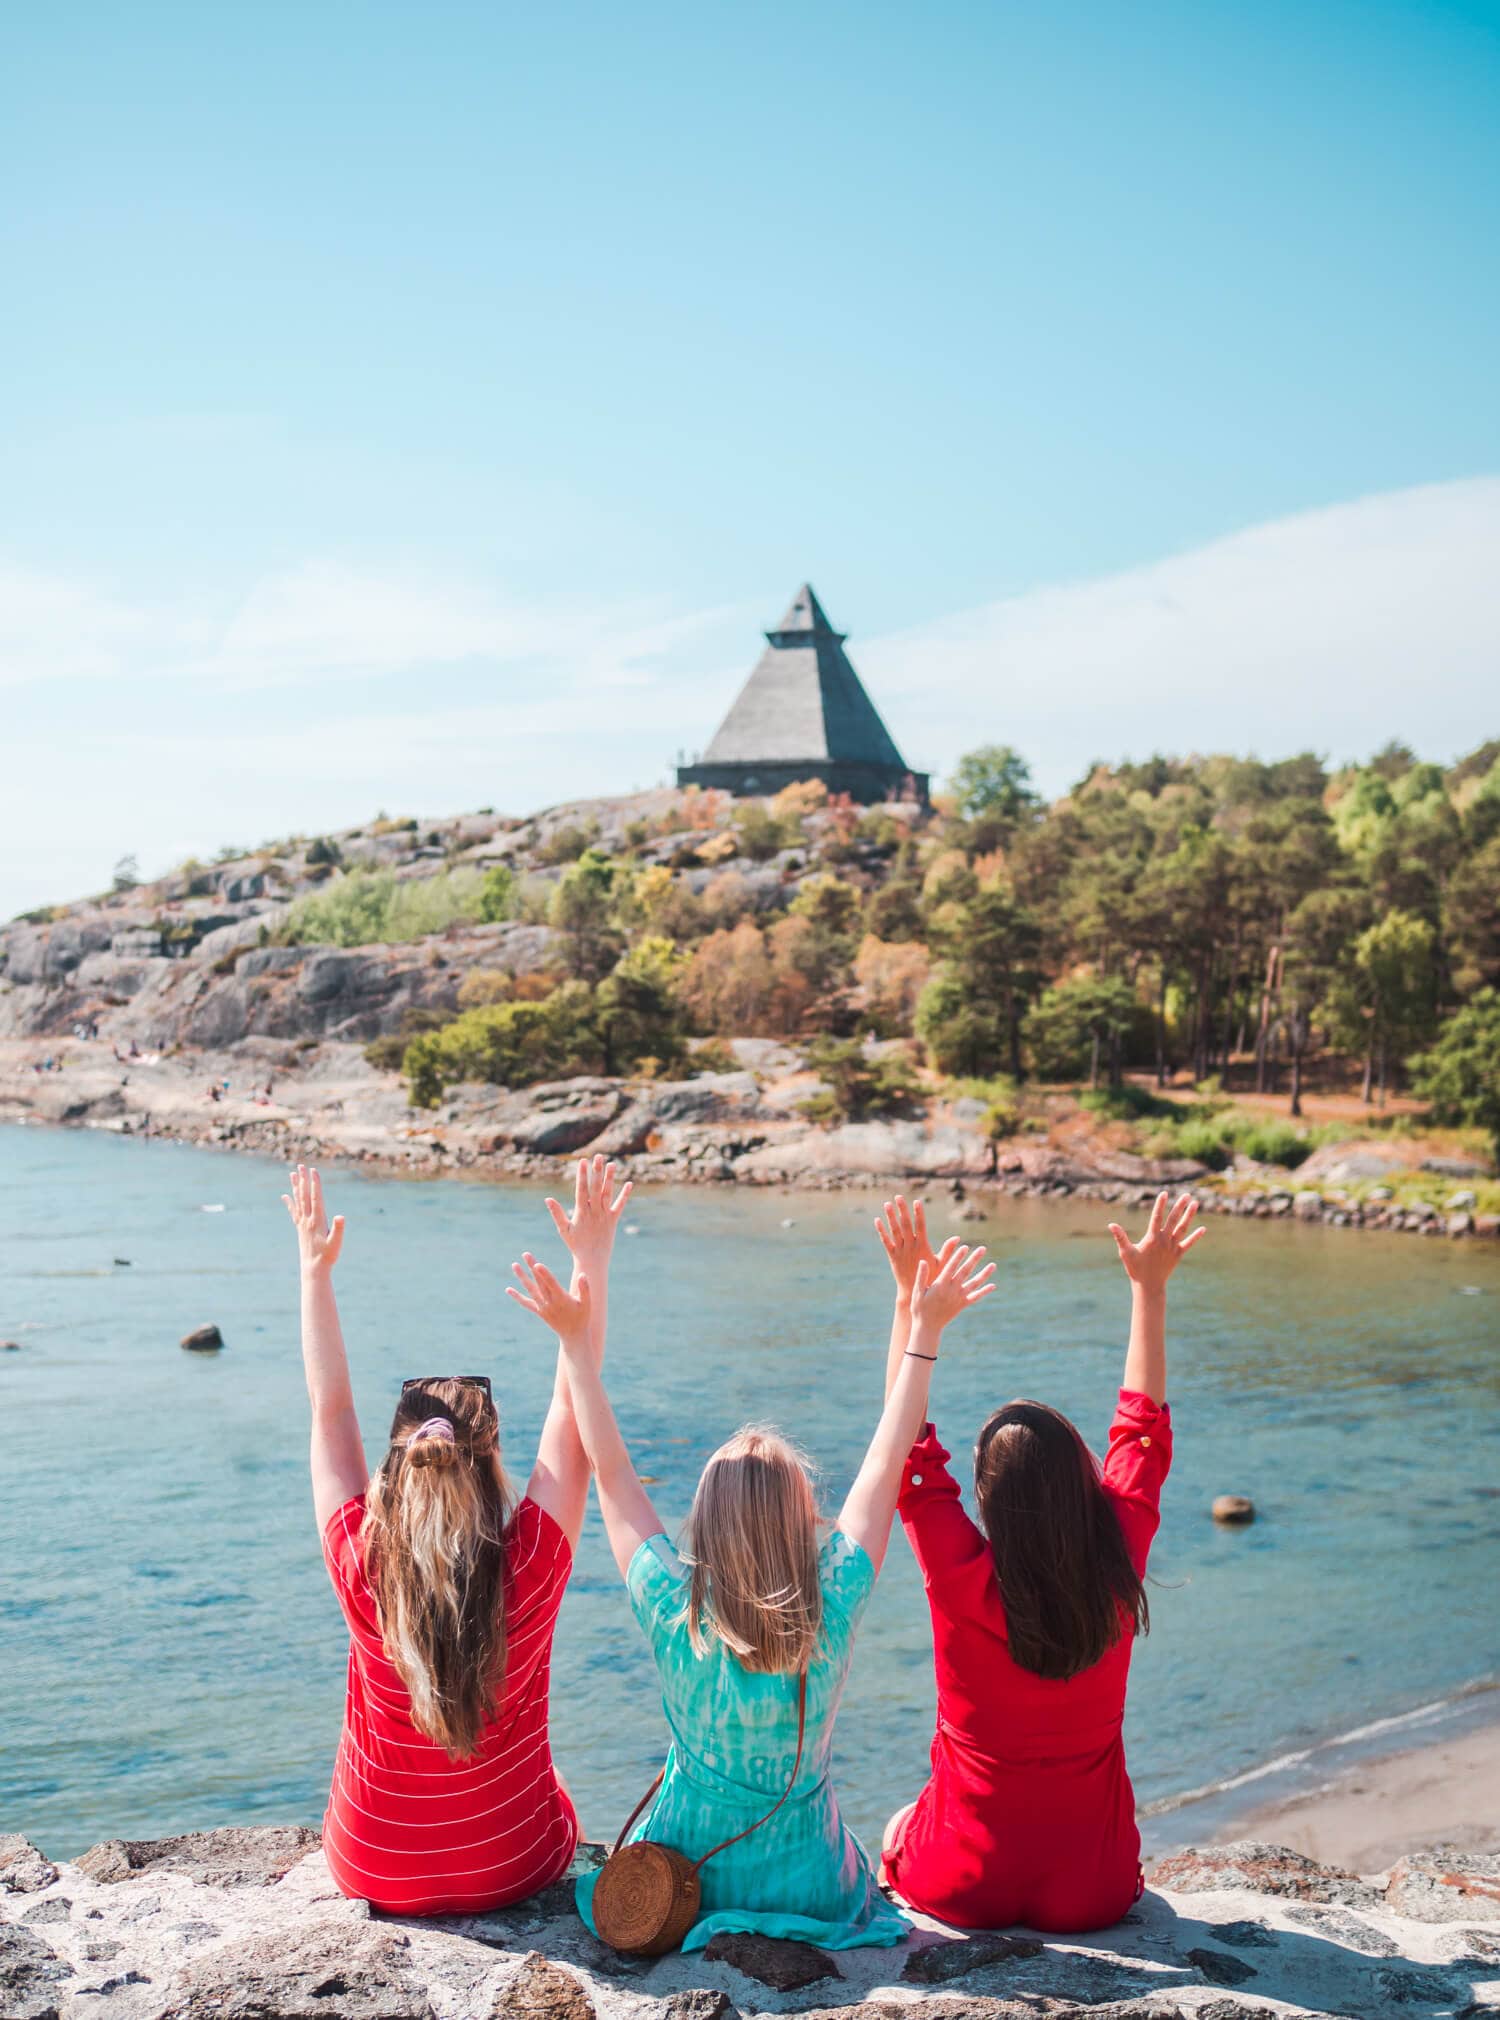 Feeling happy with my two sisters in one of Norway's most beautiful summer cities, Stavern